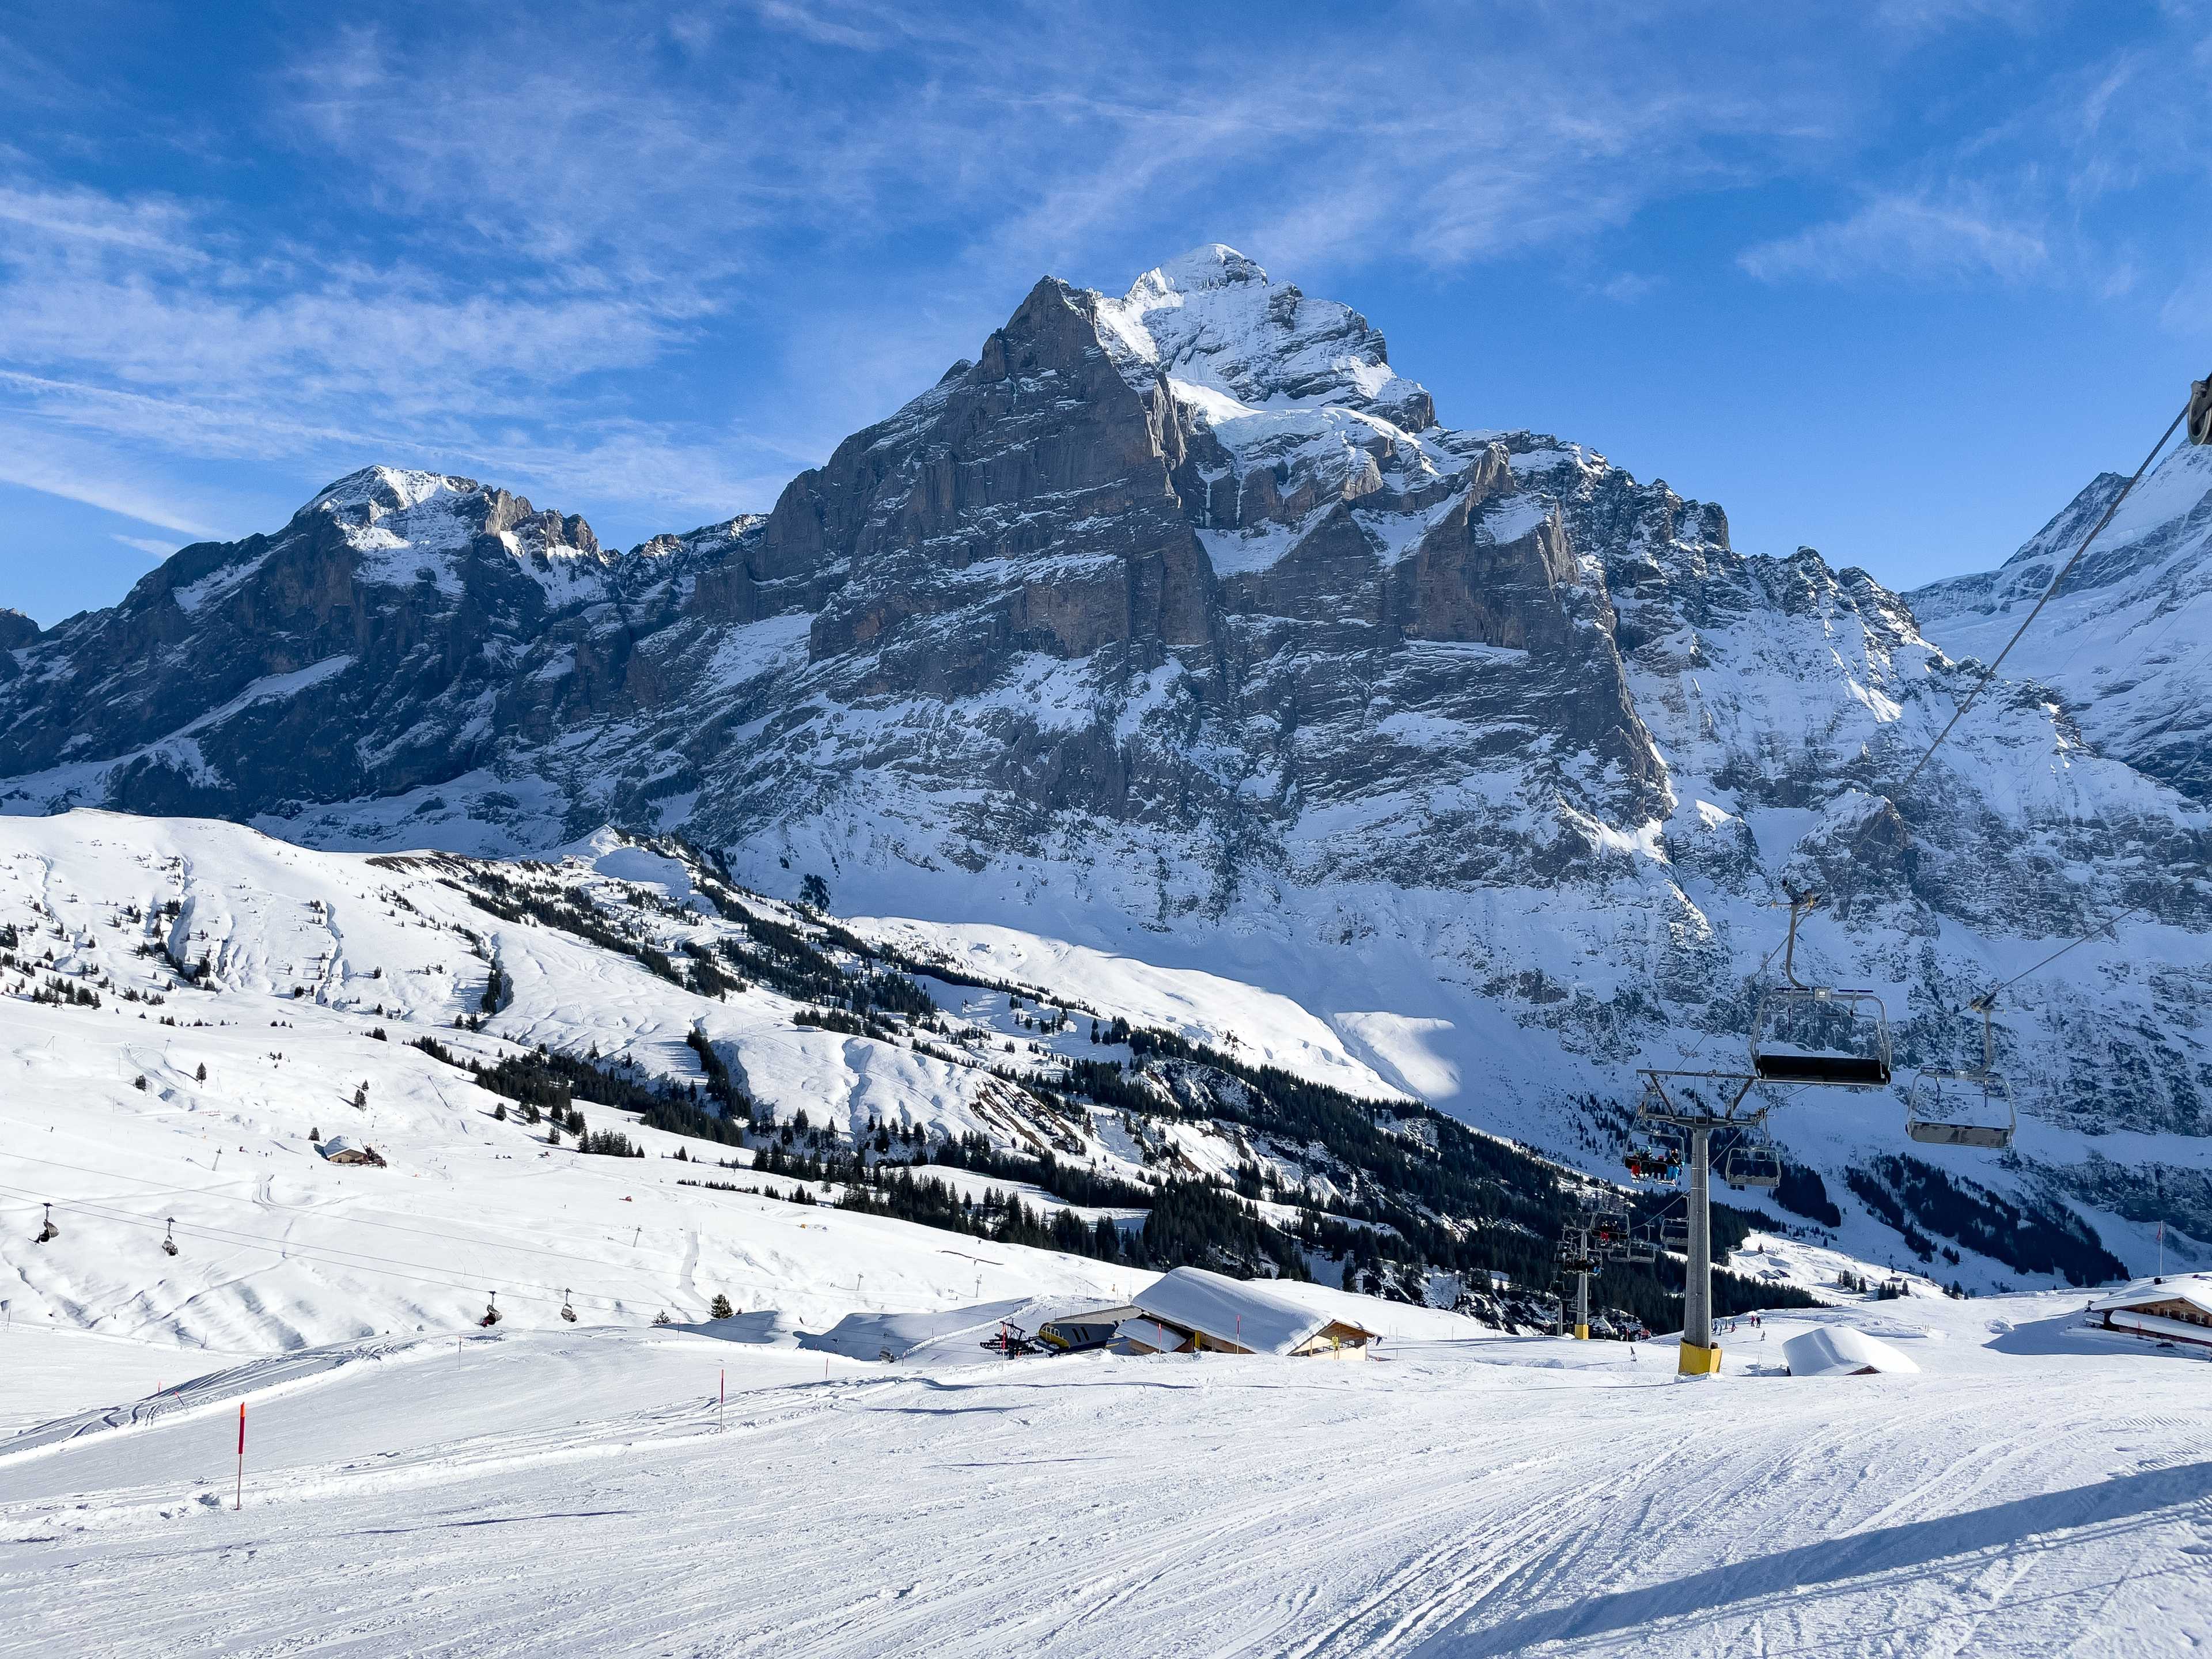 Eiger seen from First, Grindelwald, Jungfrau